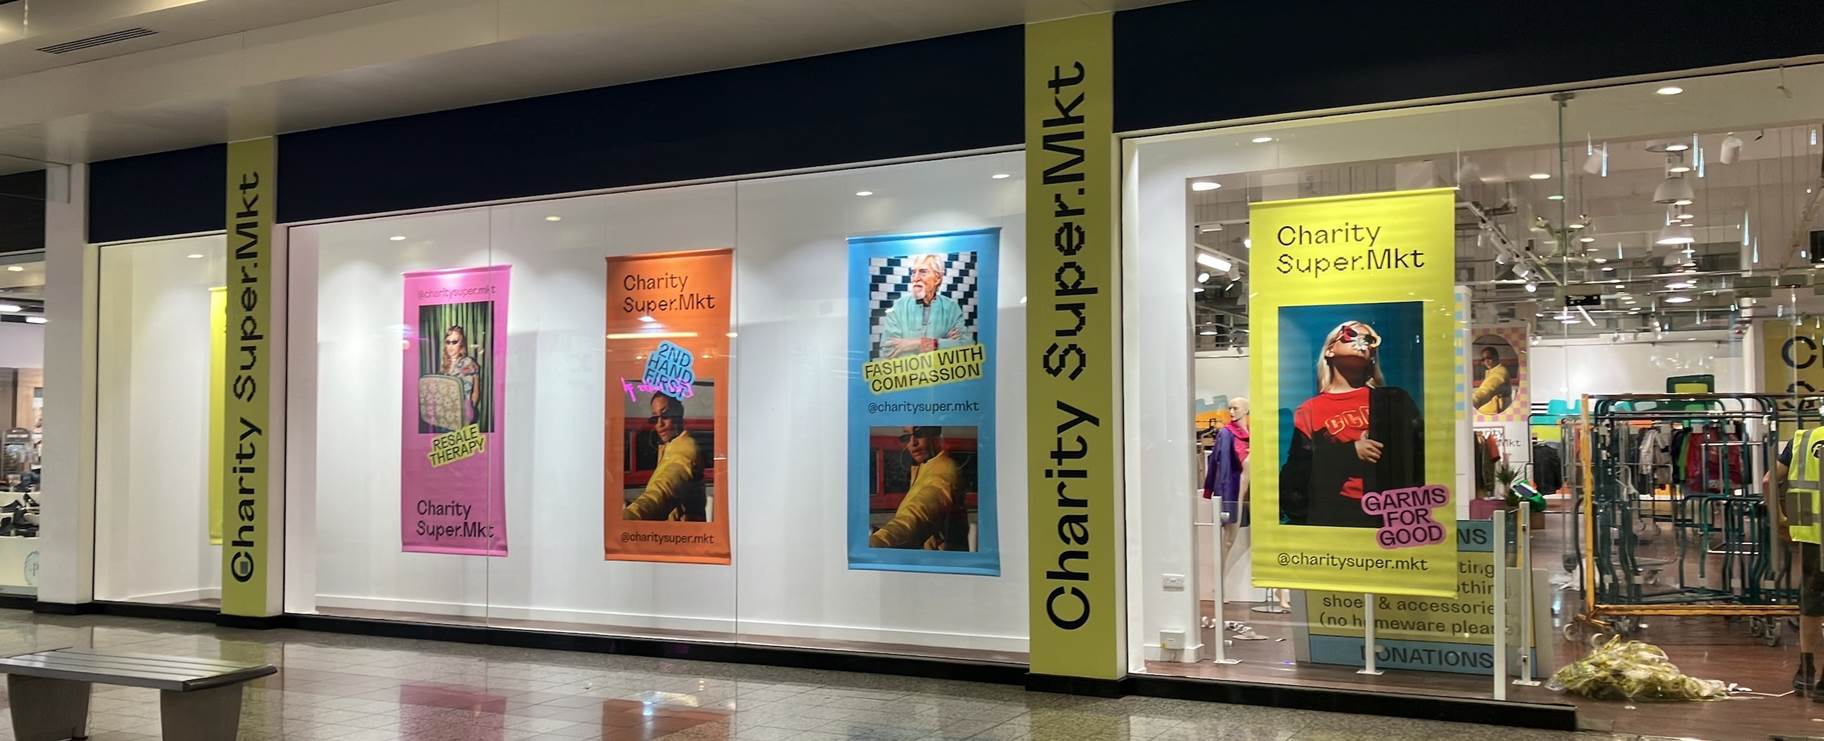 Charity Super.Mkt to open debut outlet store at Gloucester Quays